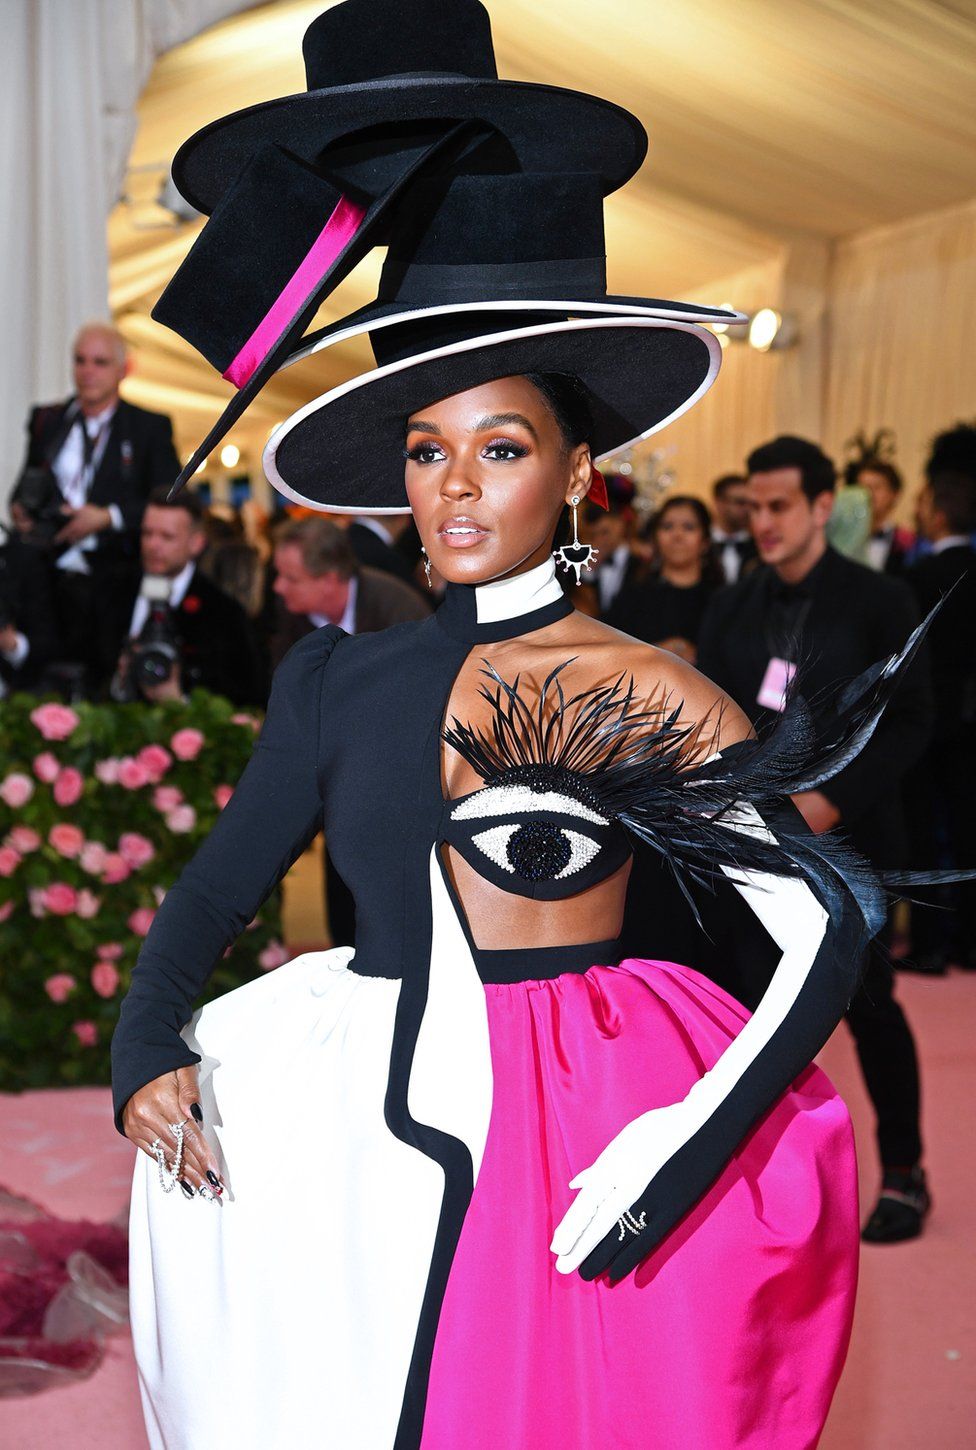 Met Gala 2019: Celebrities Reveal Their 'Campest' Looks On The Red Carpet -  Bbc News